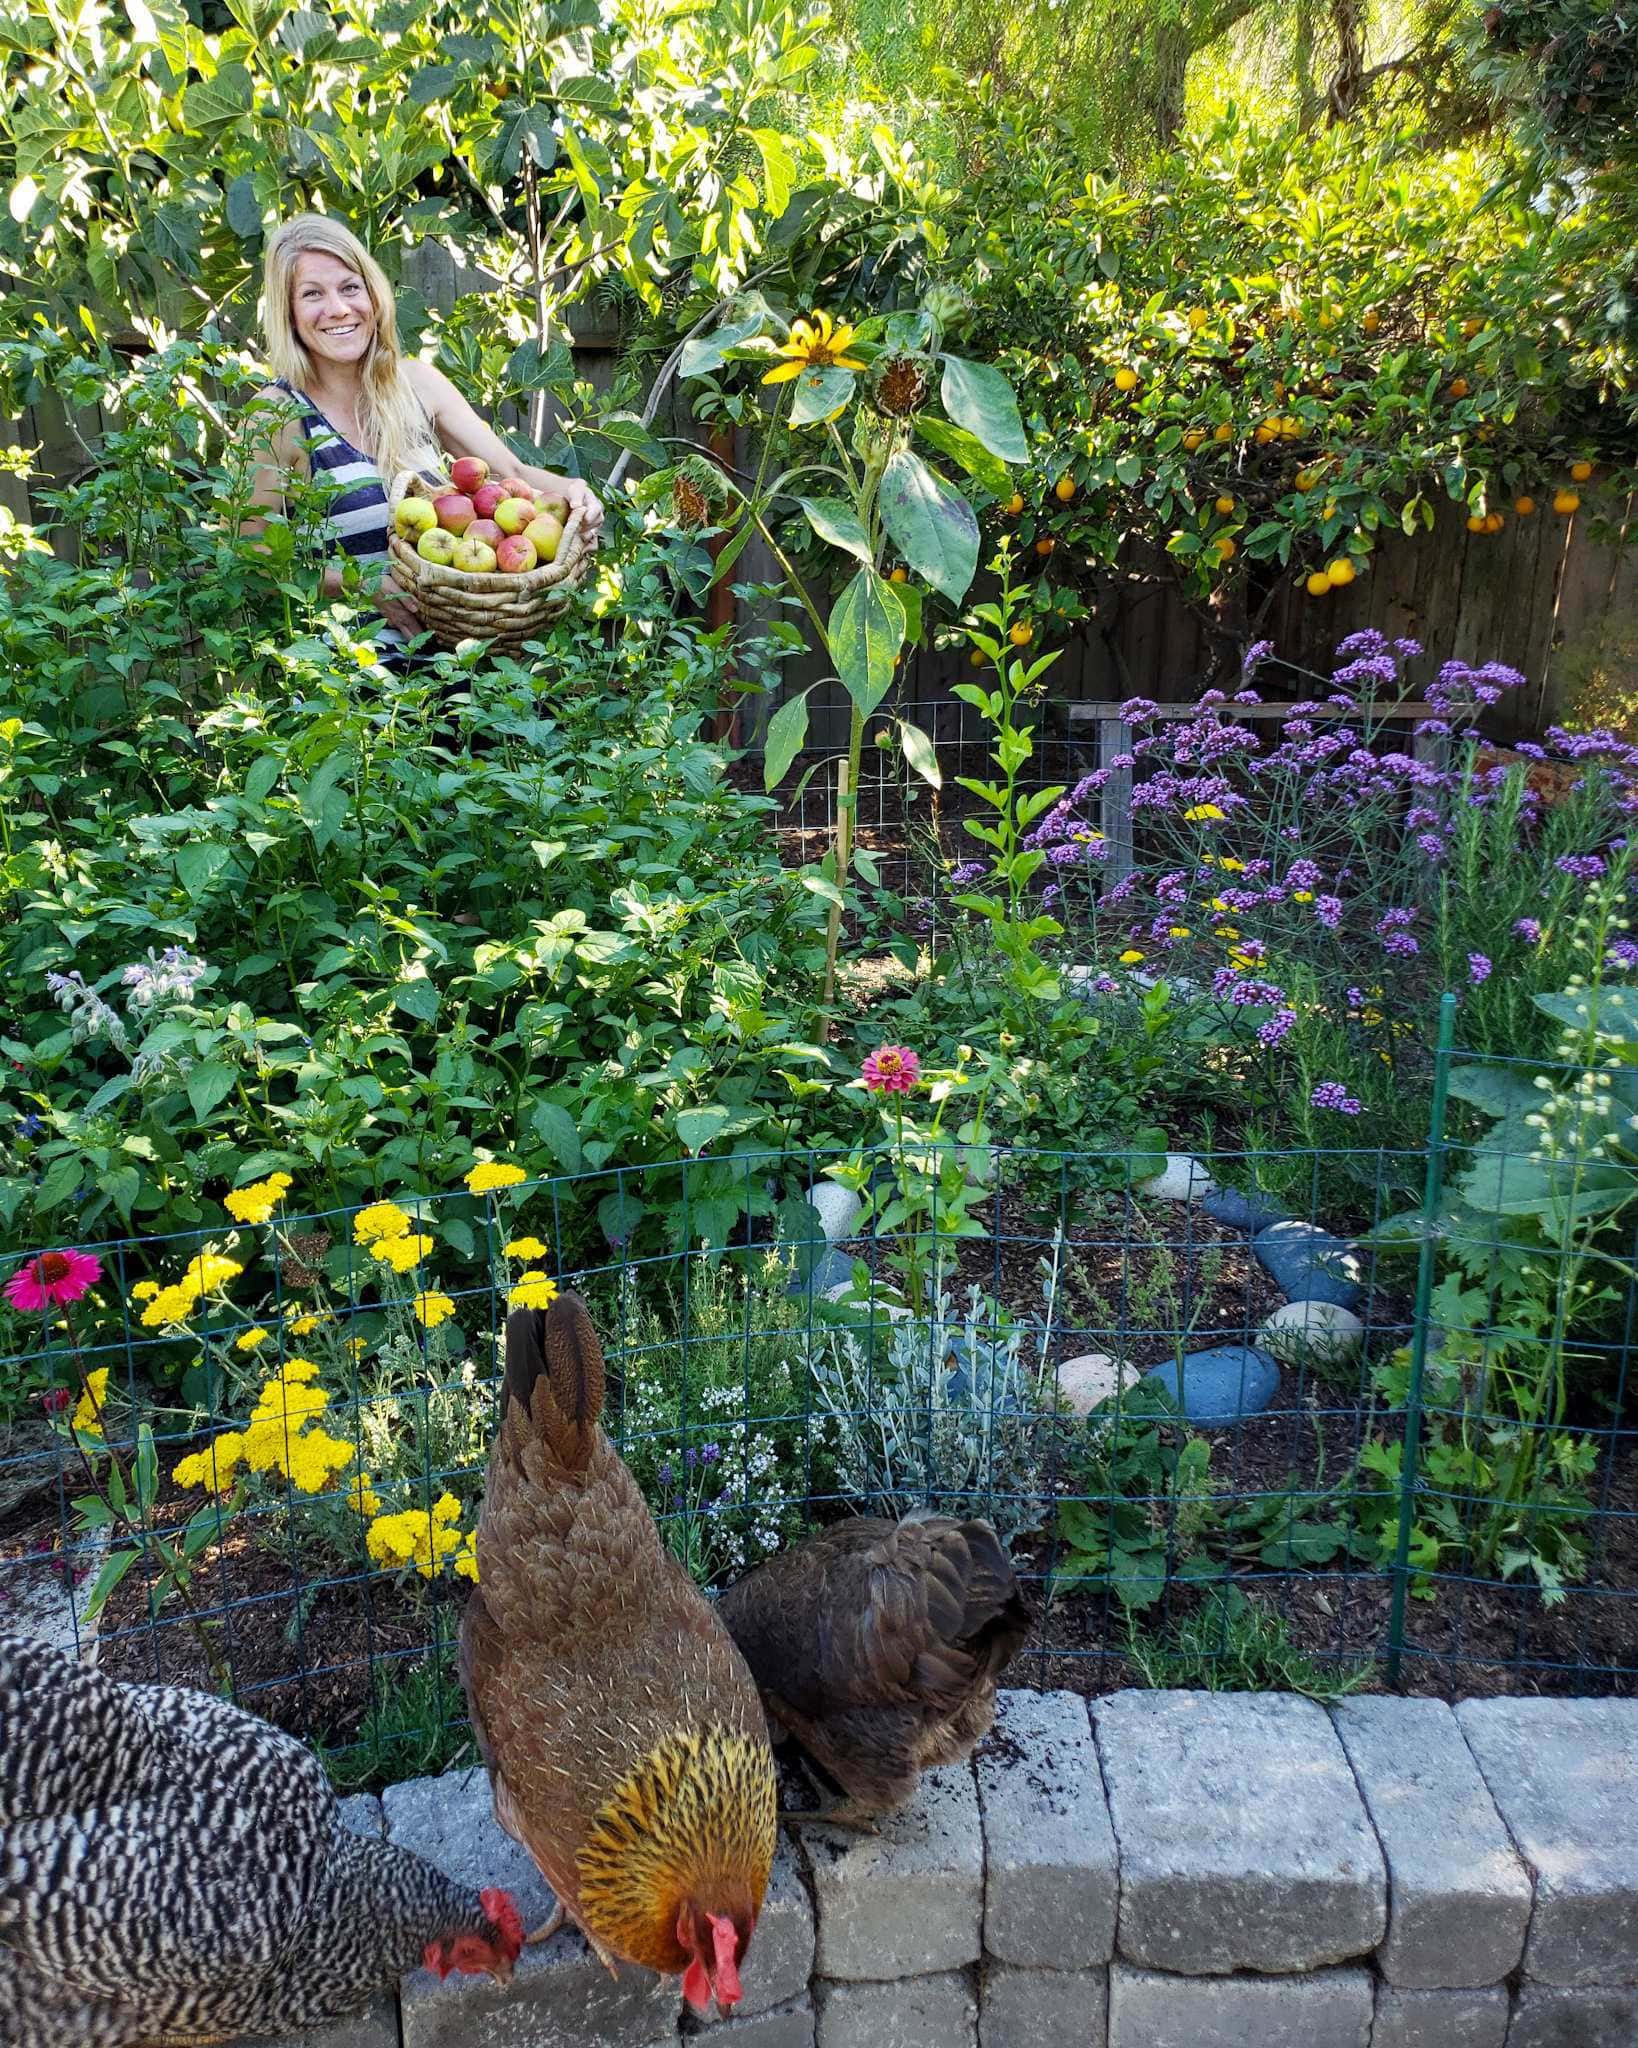 DeannaCat is standing amongst a sea of green with trees and flowering perennial and annual plants surrounding her. She is clutching a wicker basket full of freshly harvested apples. In the foreground, there are three chickens pecking around on the stone lined "pollinator island".